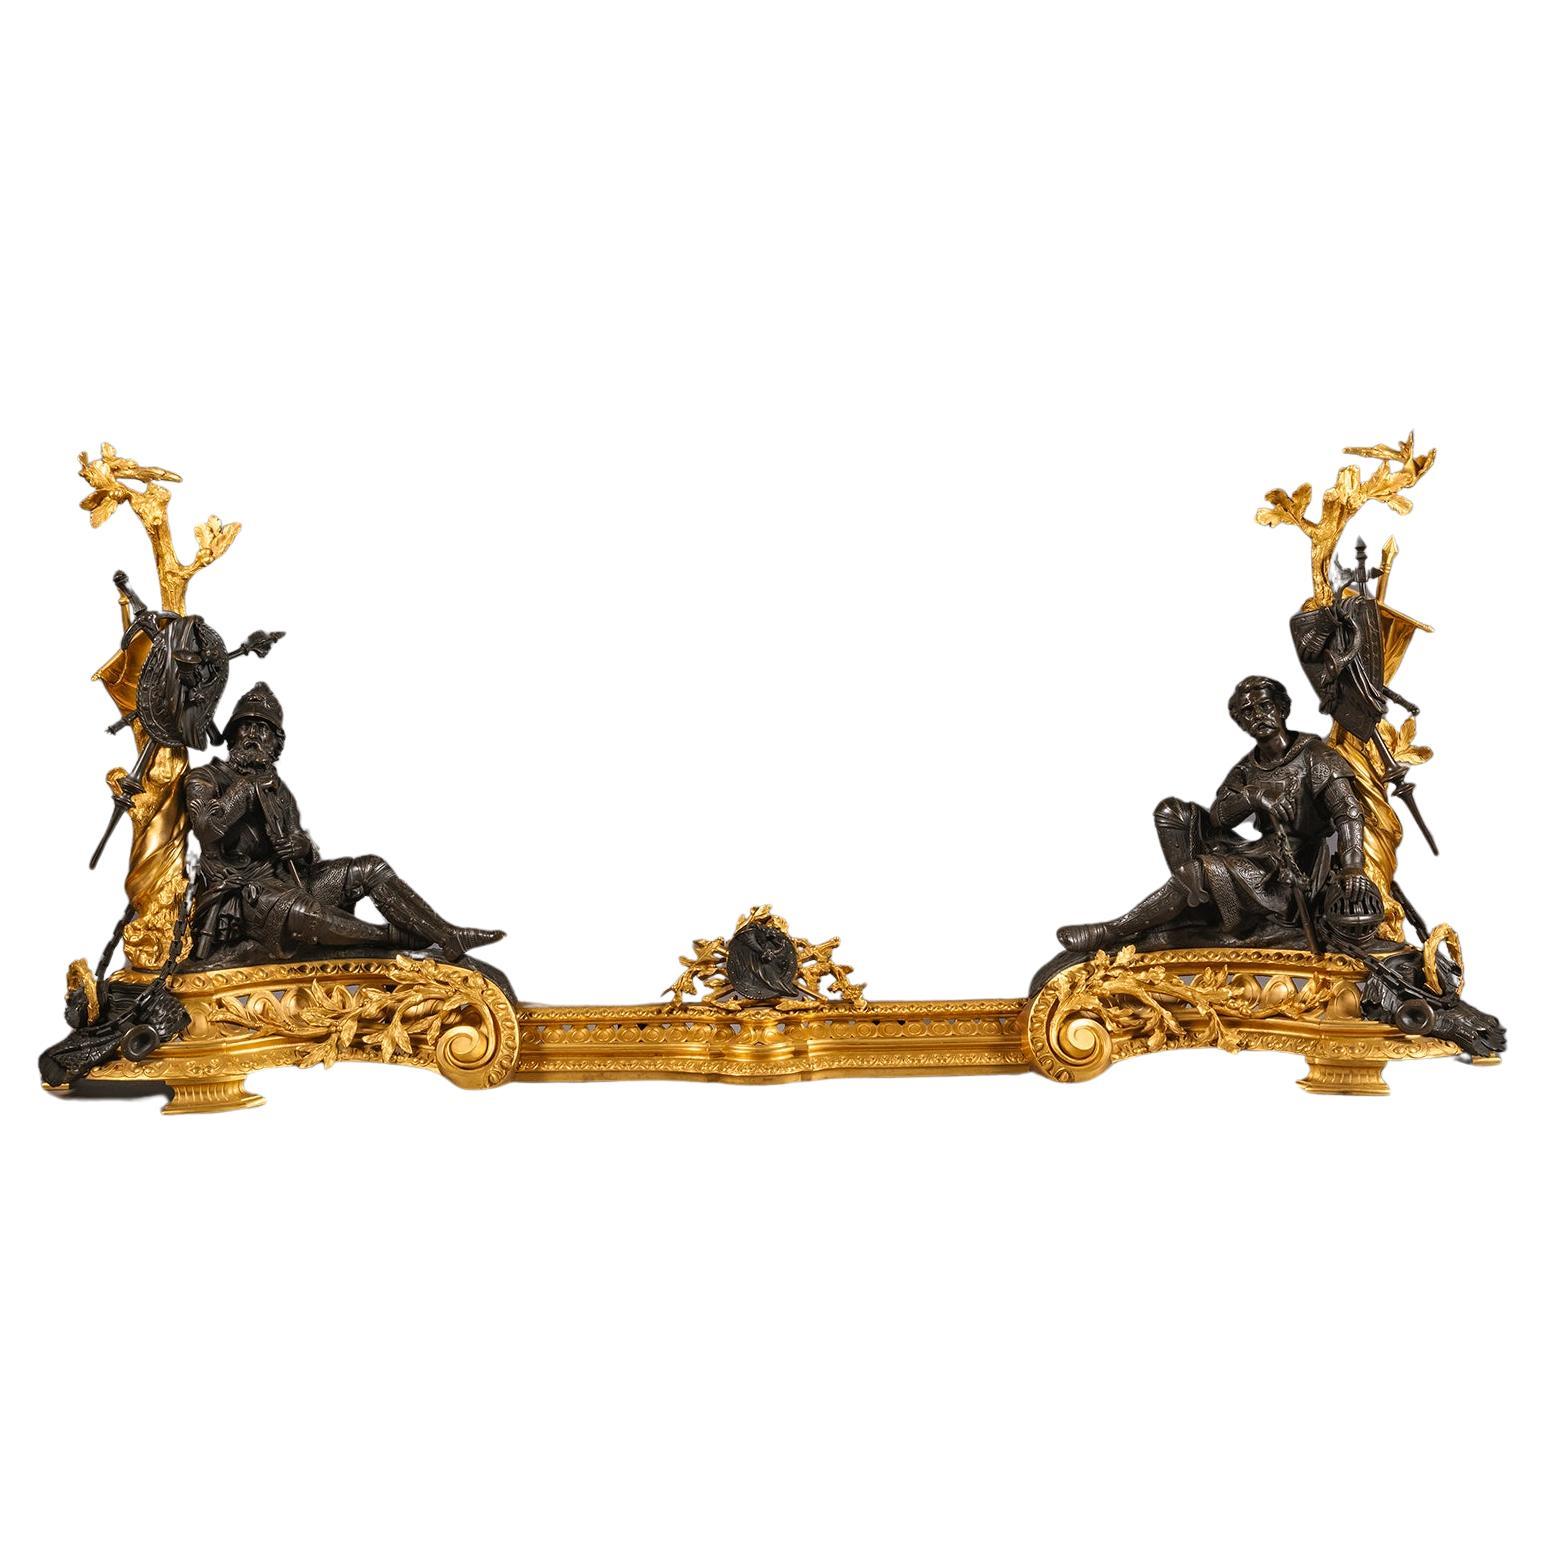 A Fine Napoleon III Period Gilt and Patinated Bronze Fender For Sale